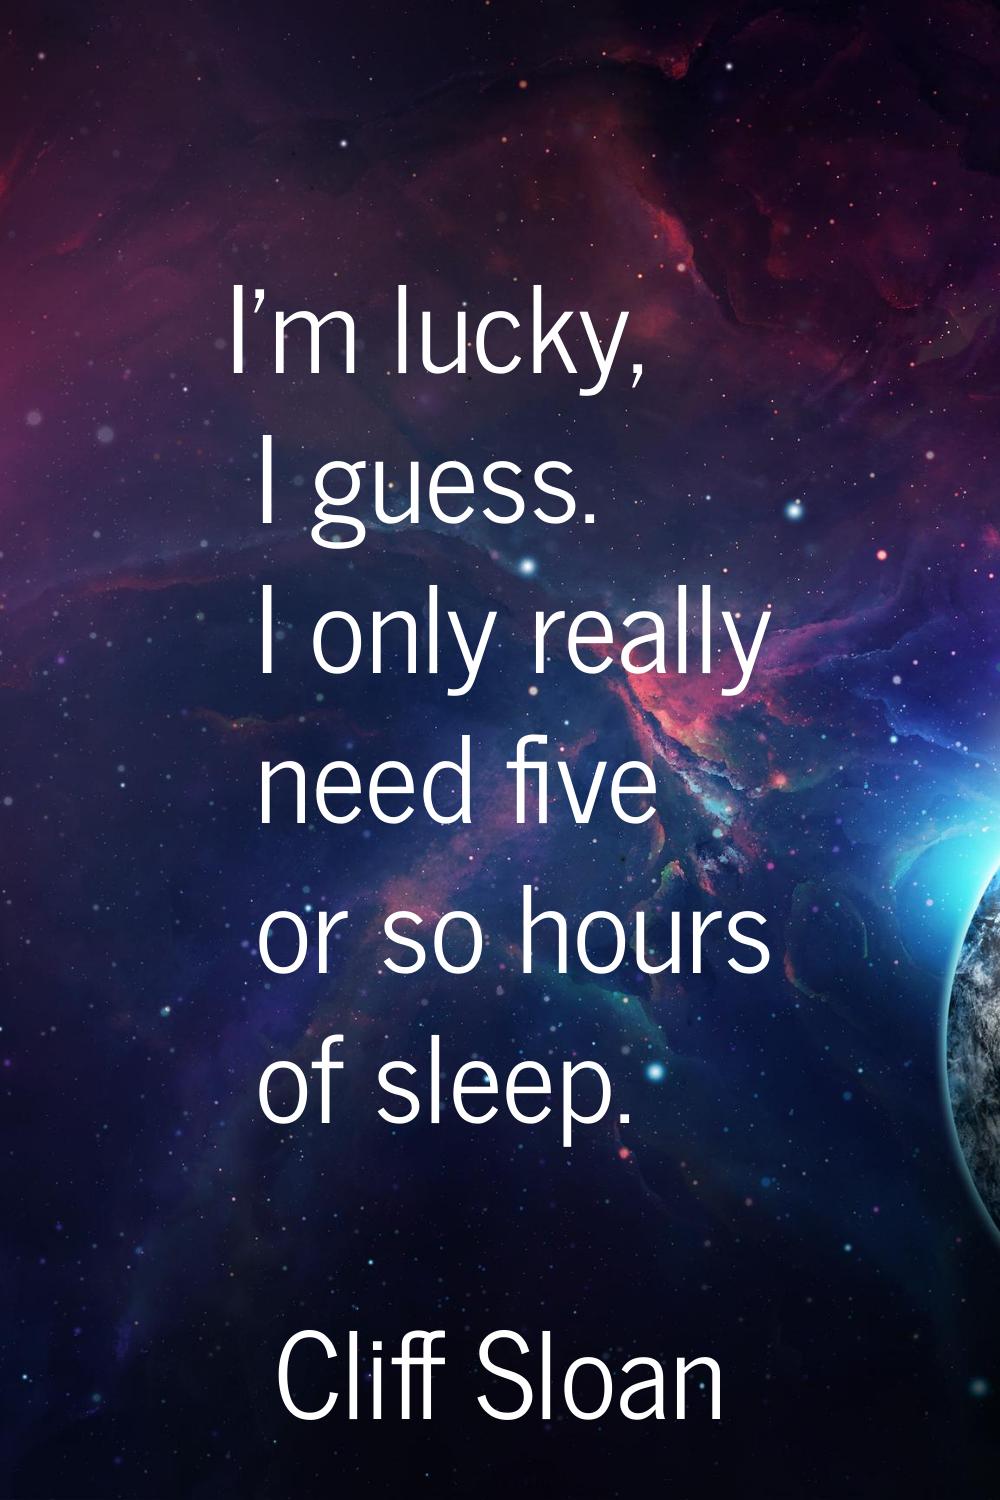 I'm lucky, I guess. I only really need five or so hours of sleep.